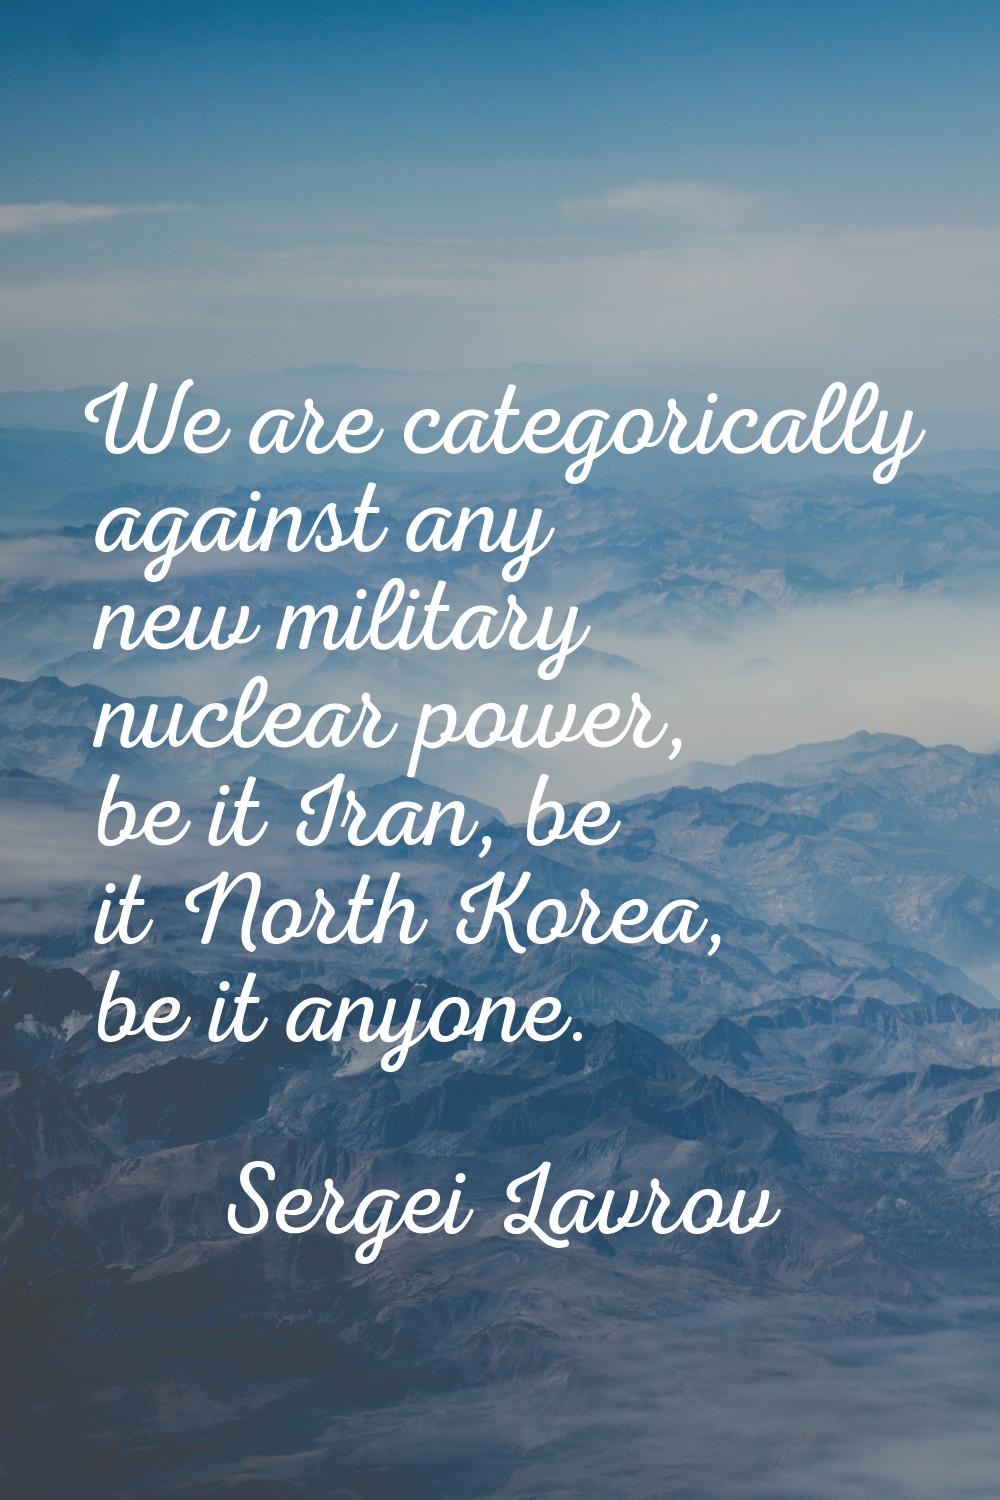 We are categorically against any new military nuclear power, be it Iran, be it North Korea, be it a